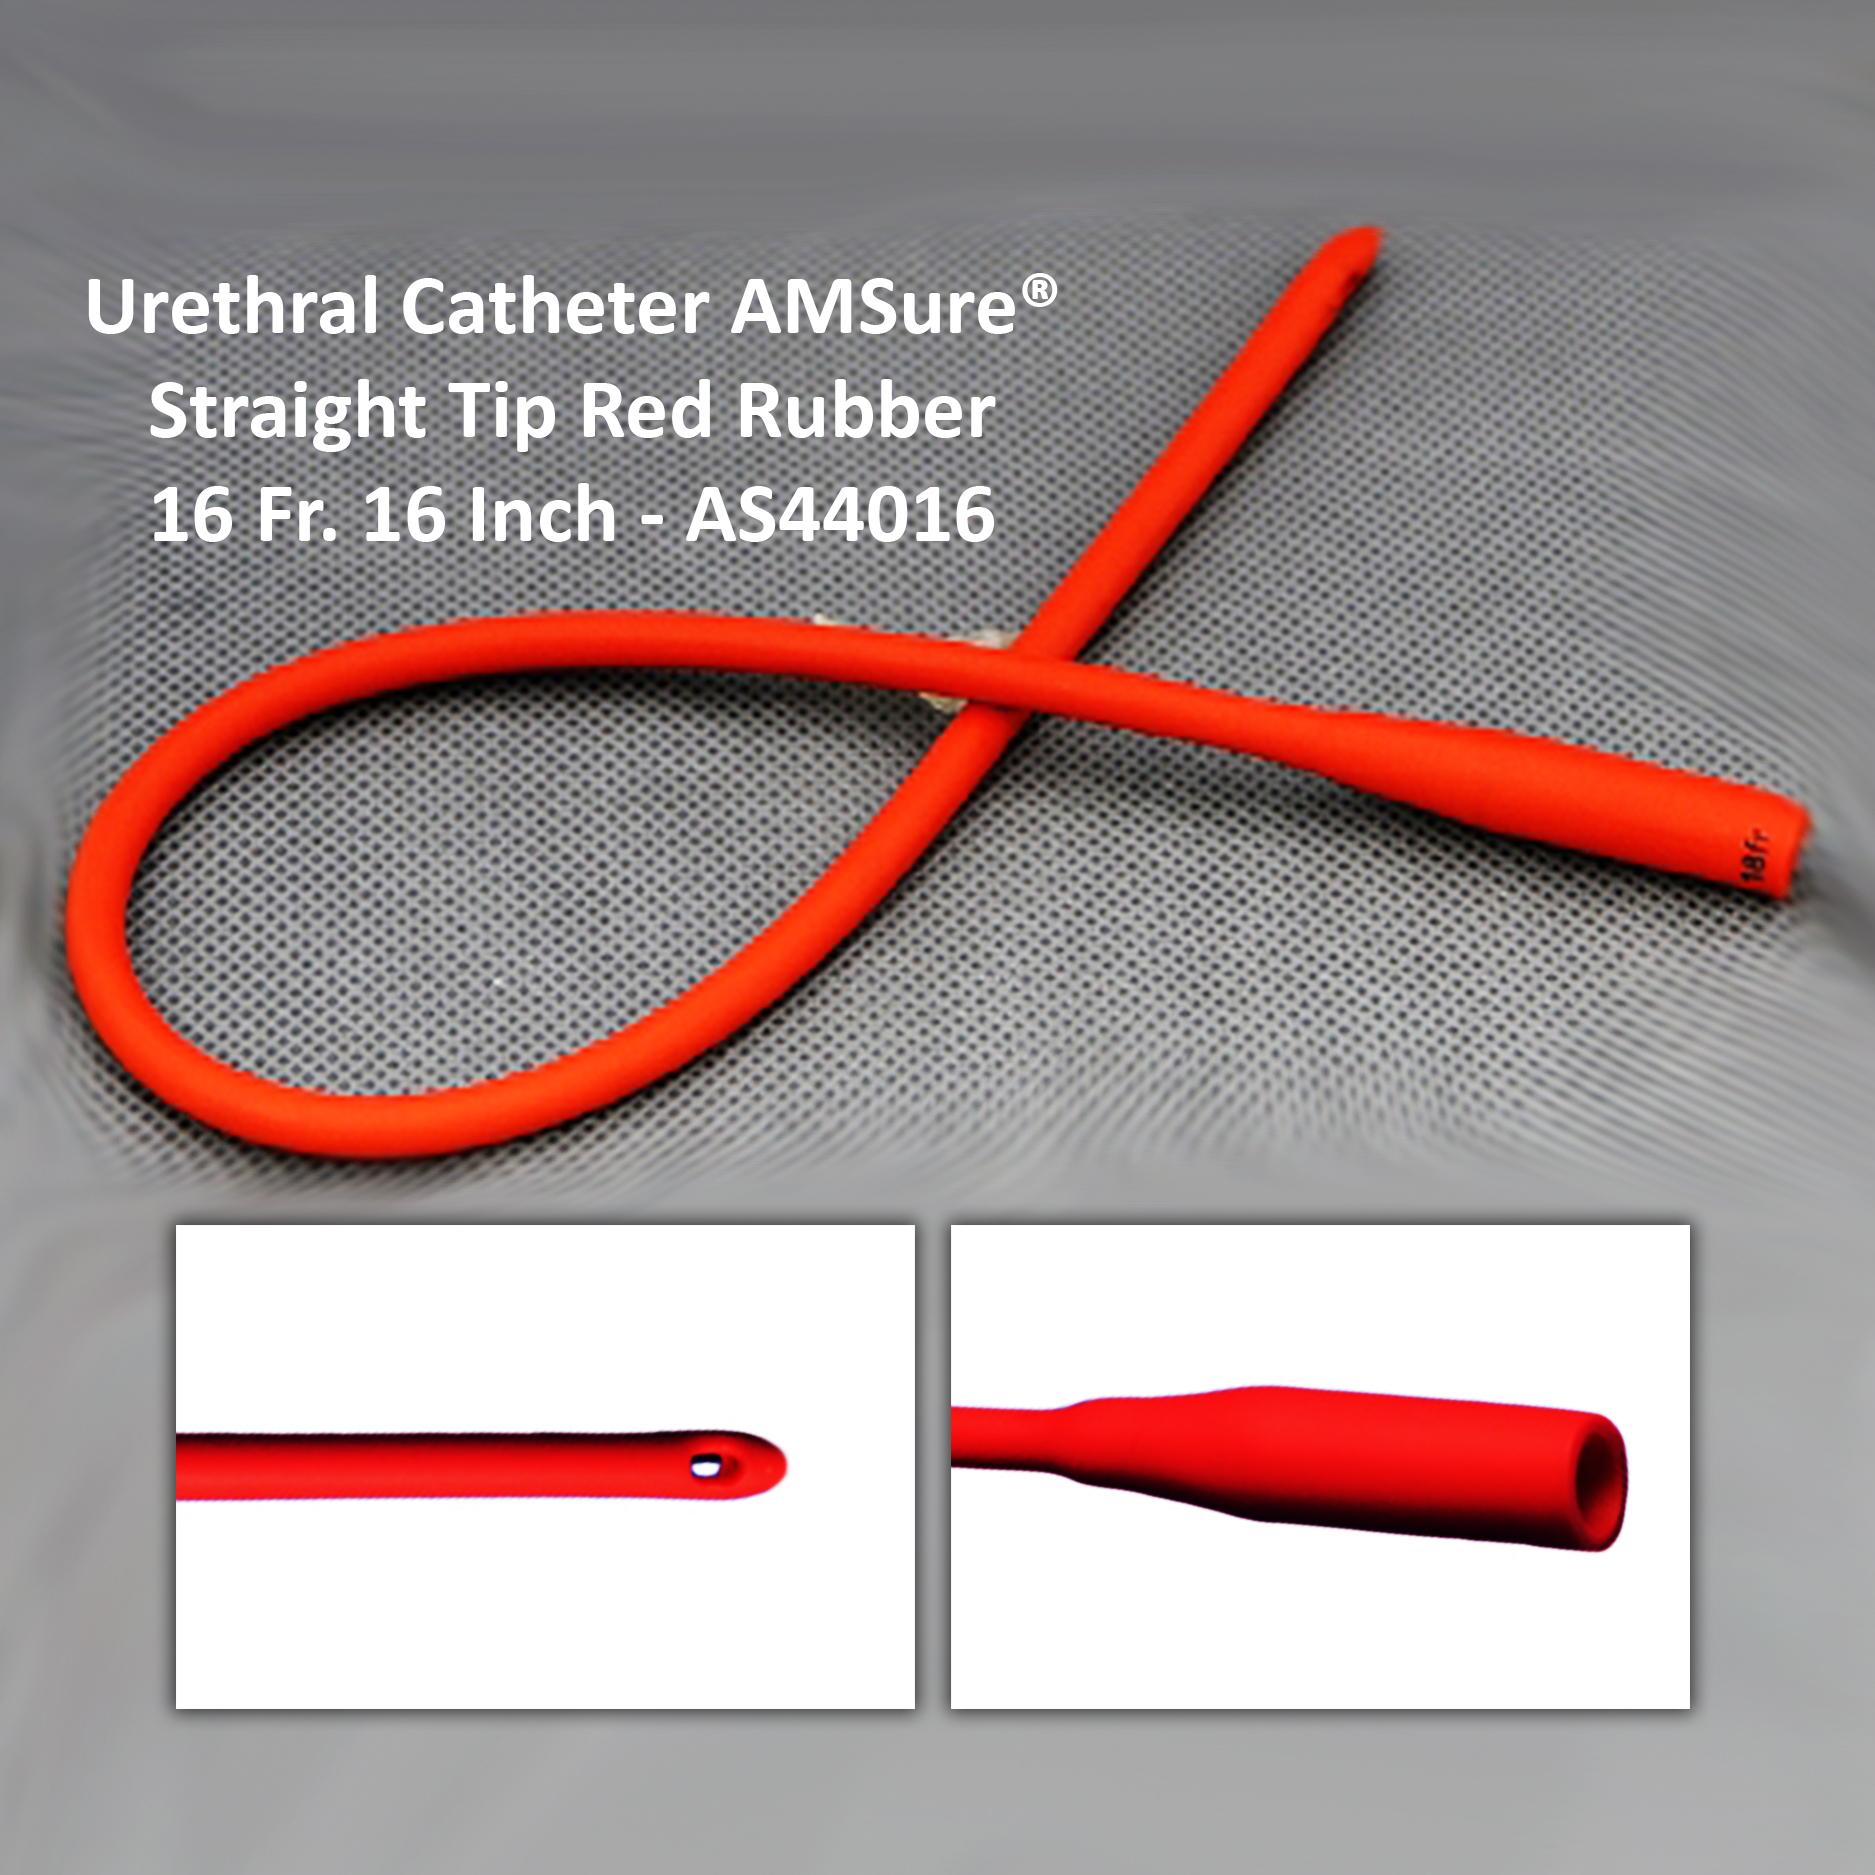 Urethral Catheter AMSure® Straight Tip Red Rubber 16 Fr. 16 Inch - AS44016 Michigan | USA